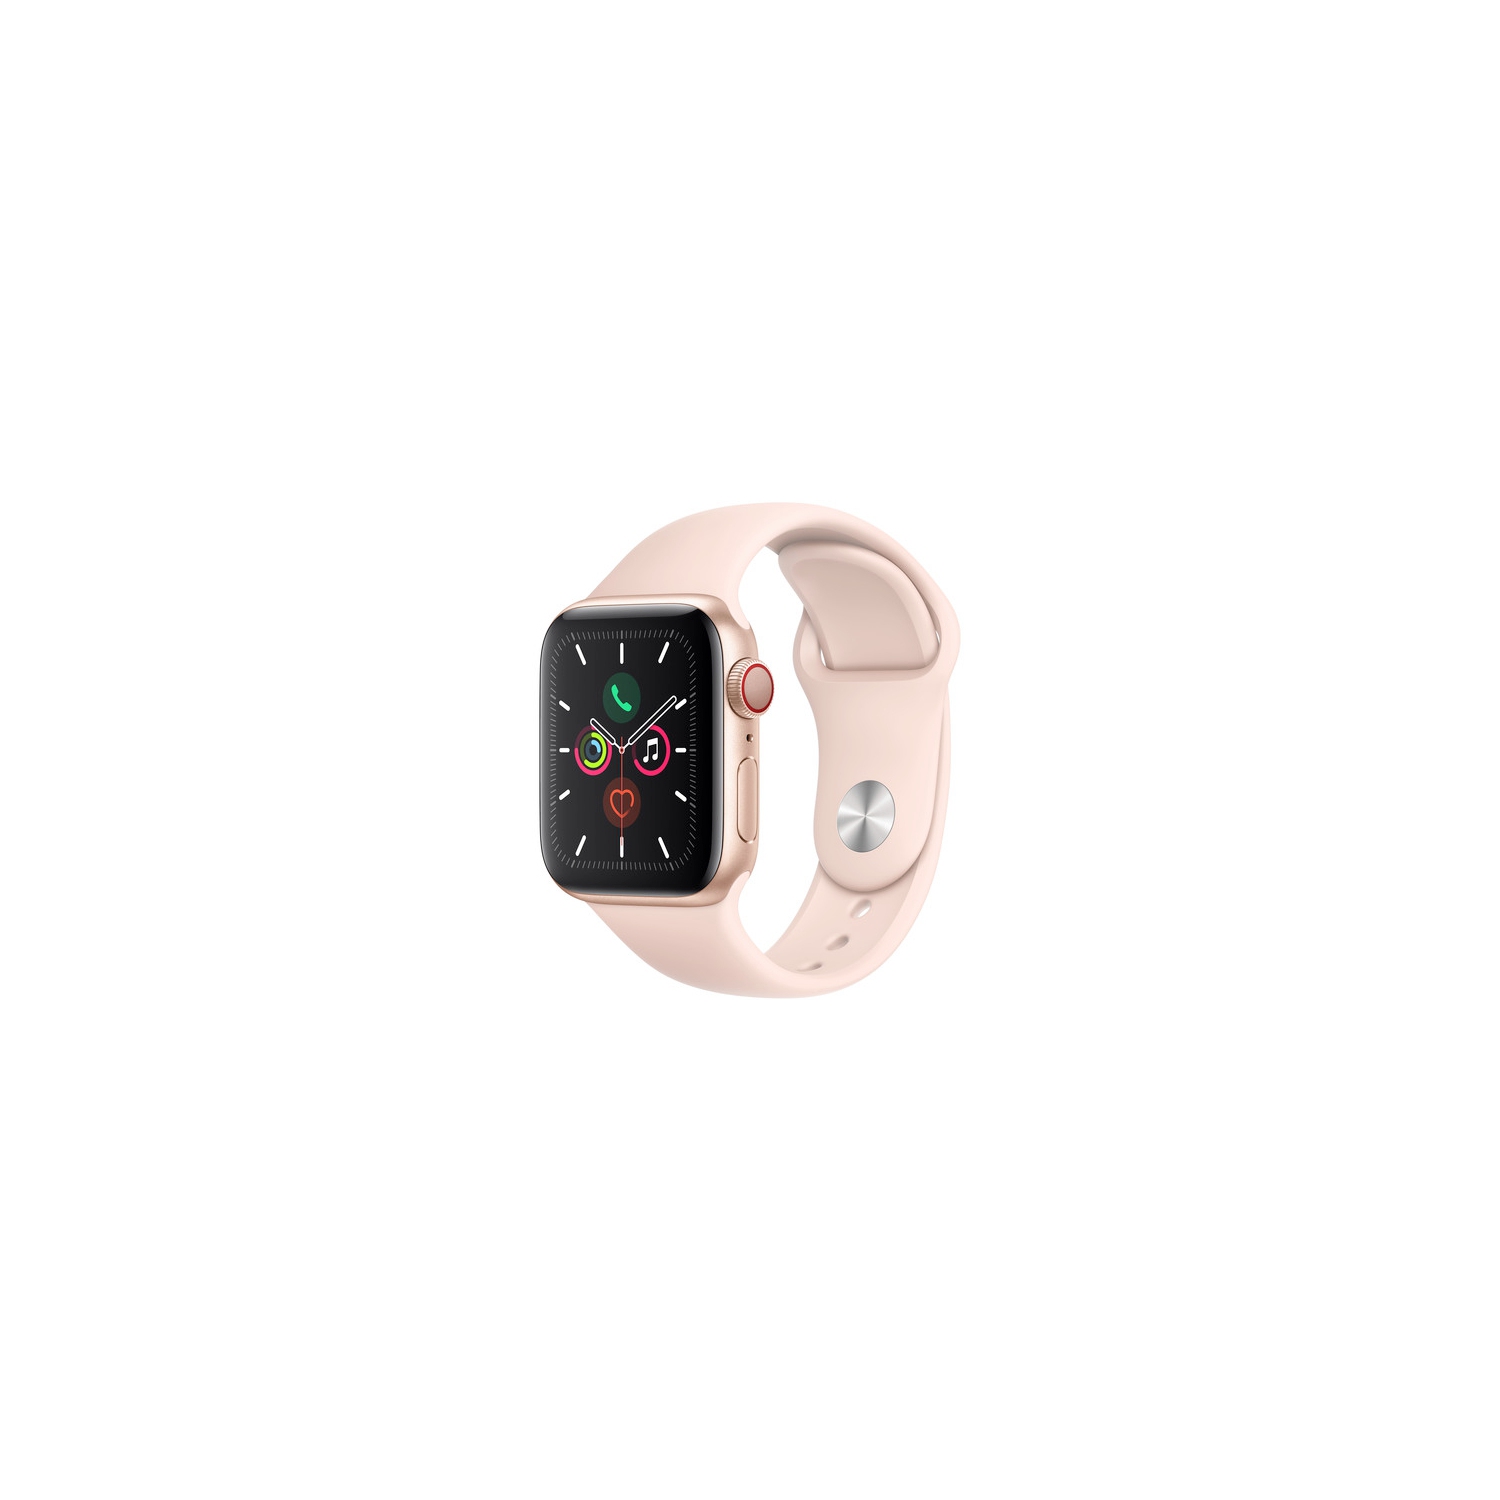 Apple Watch Series 5 (GPS) 40mm Gold Aluminum with Pink Sand Sport